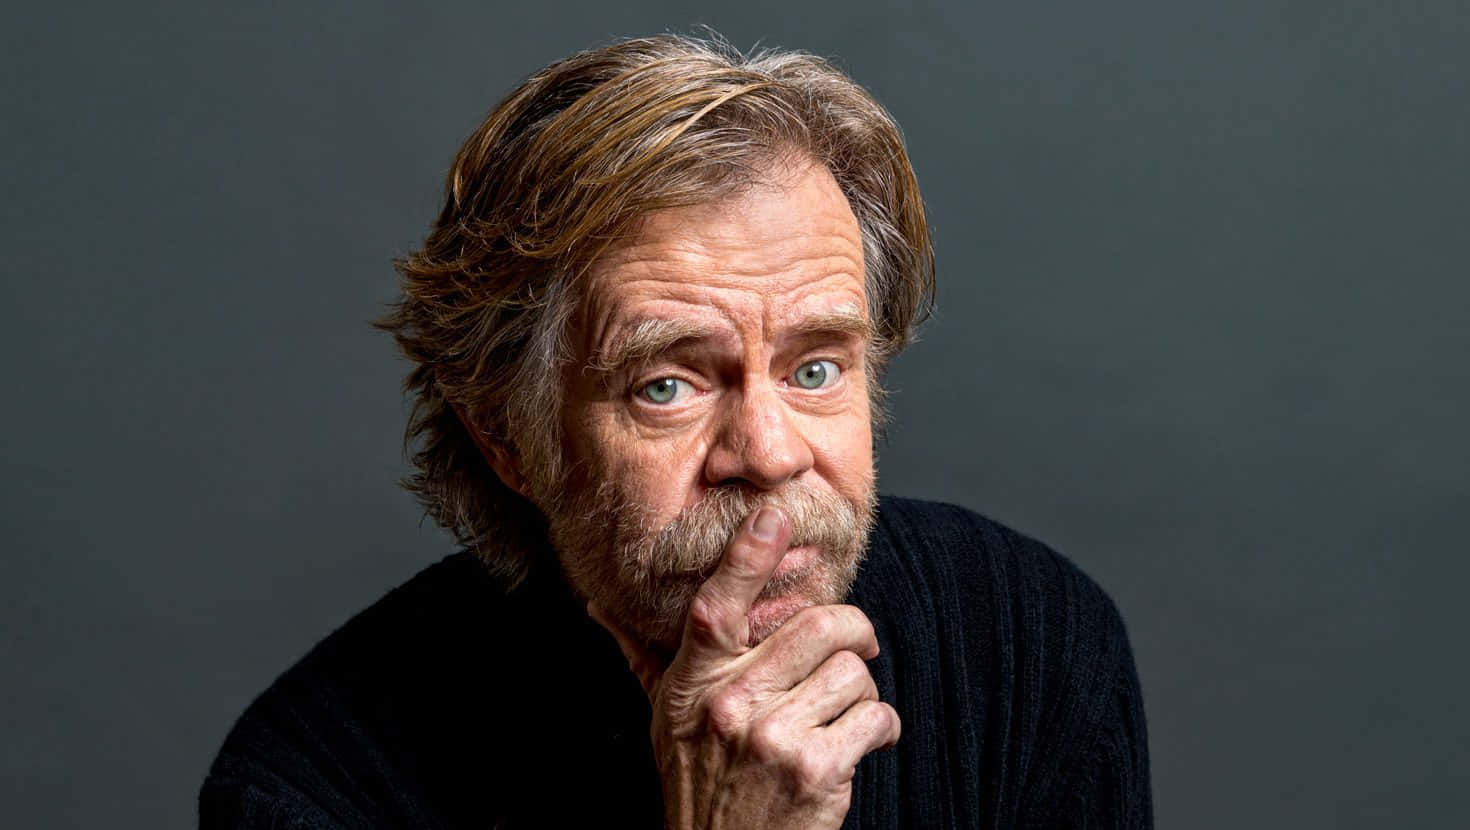 Award-winning Actor William H. Macy Posing For A Portrait. Background